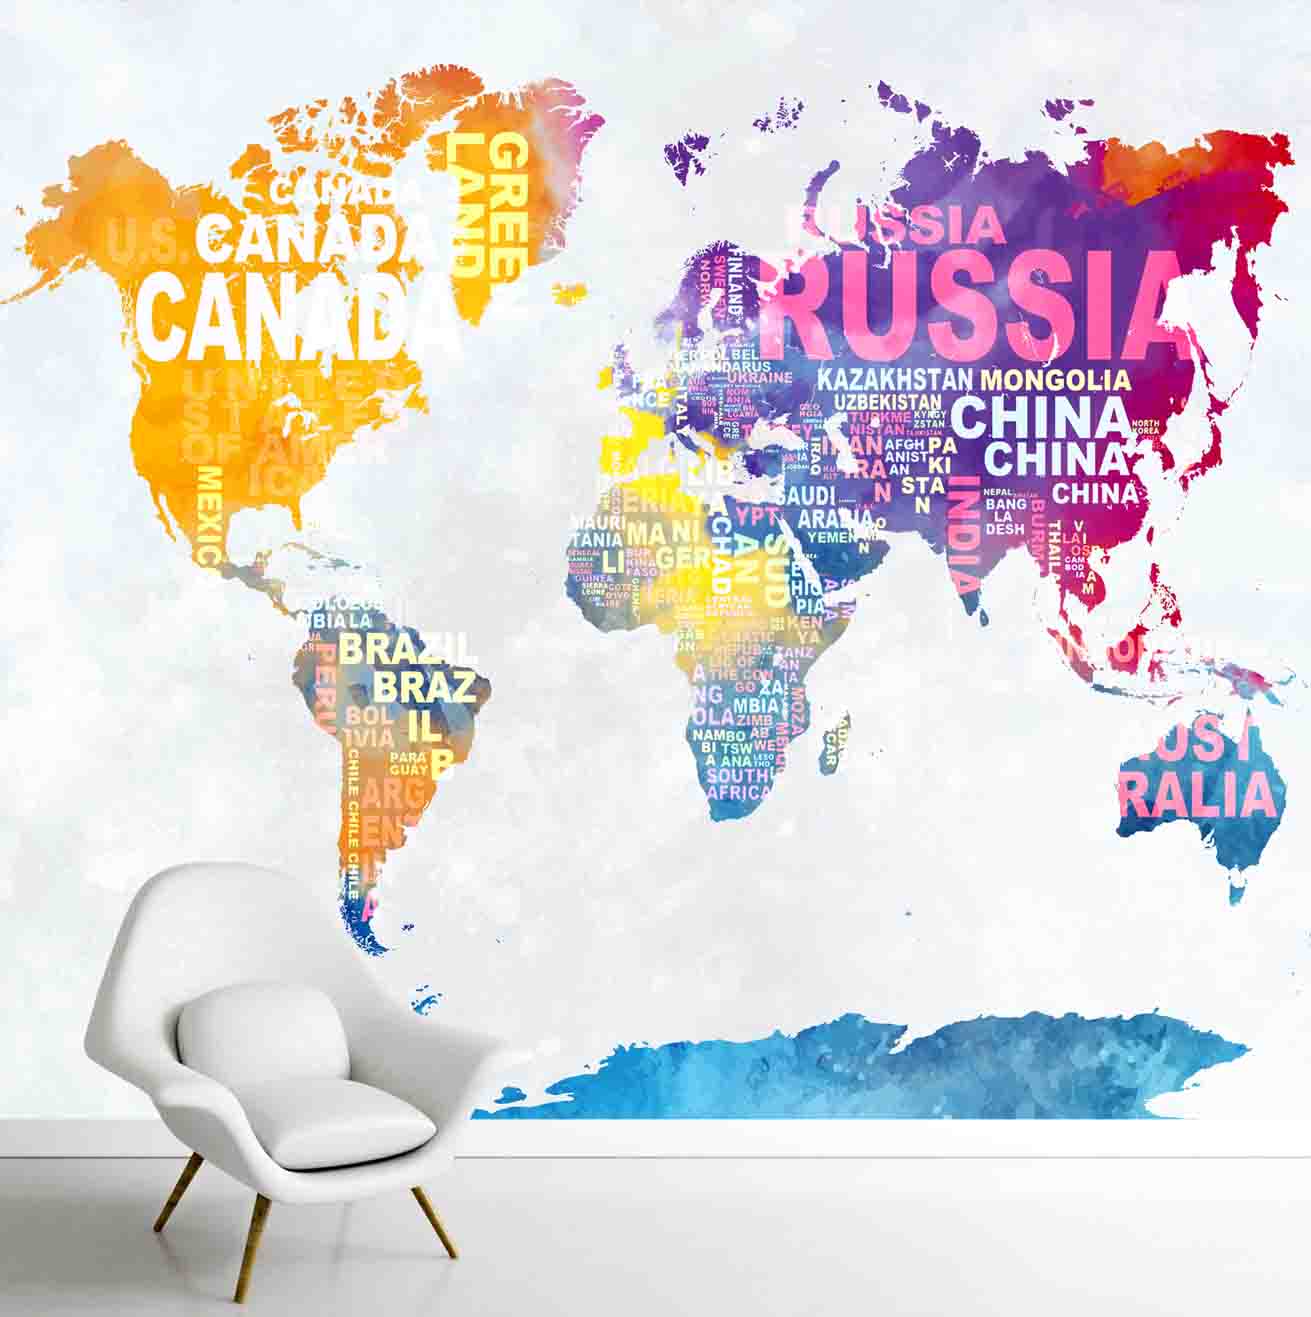 Abstract Colourful World Map for Walls, Vibrant Colors, Customised